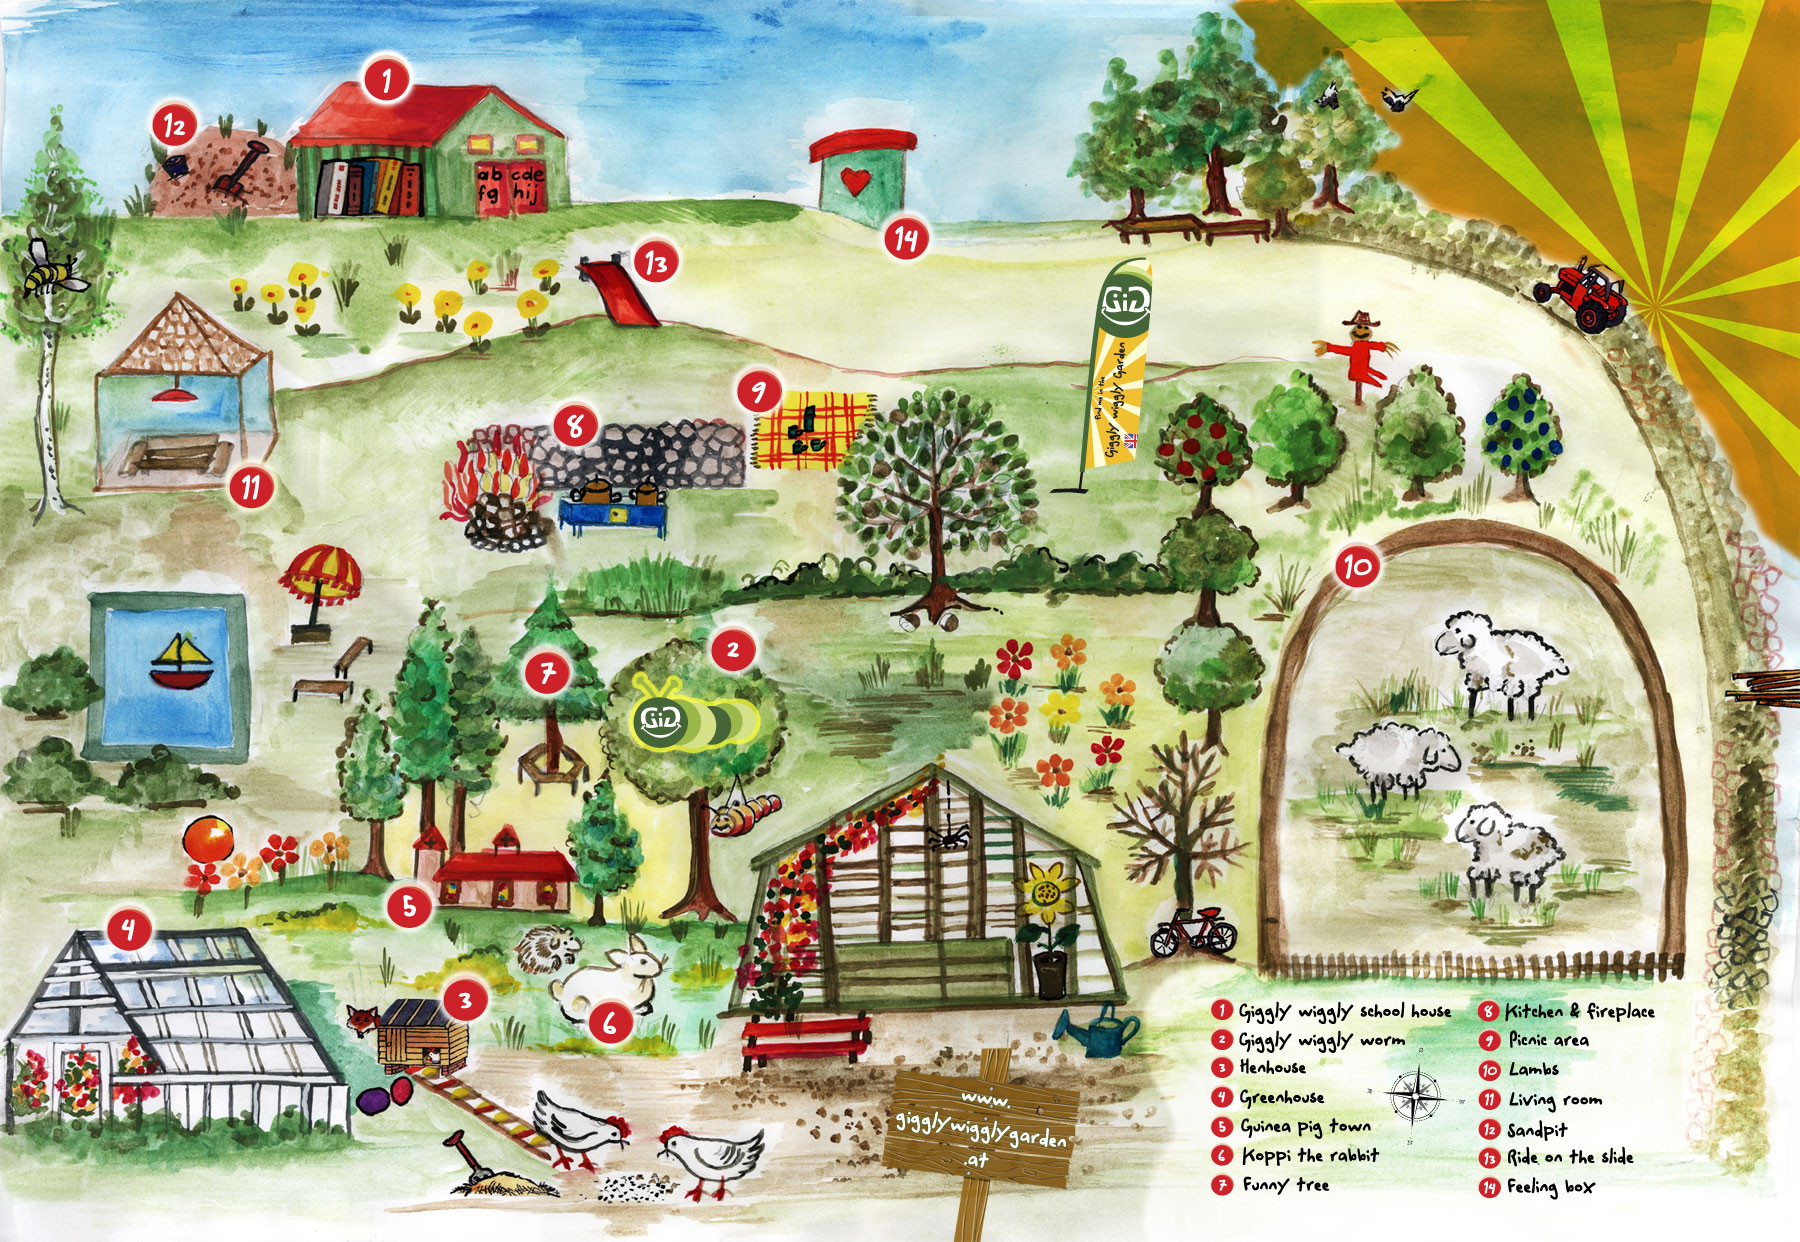 Giggly Wiggly Garden Map